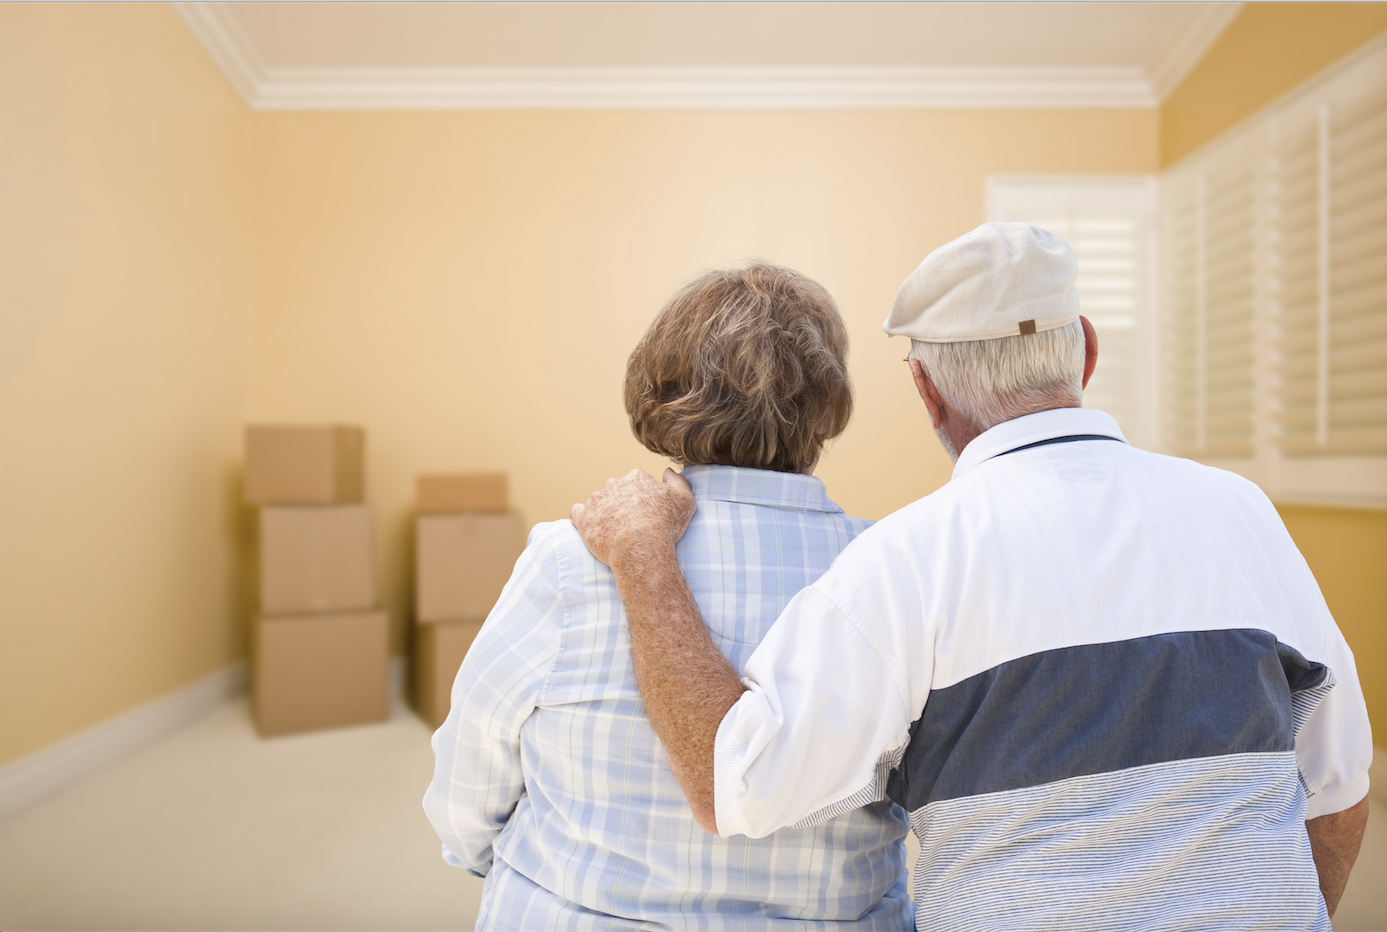 DOWNSIZING: Helping an Aging Parent